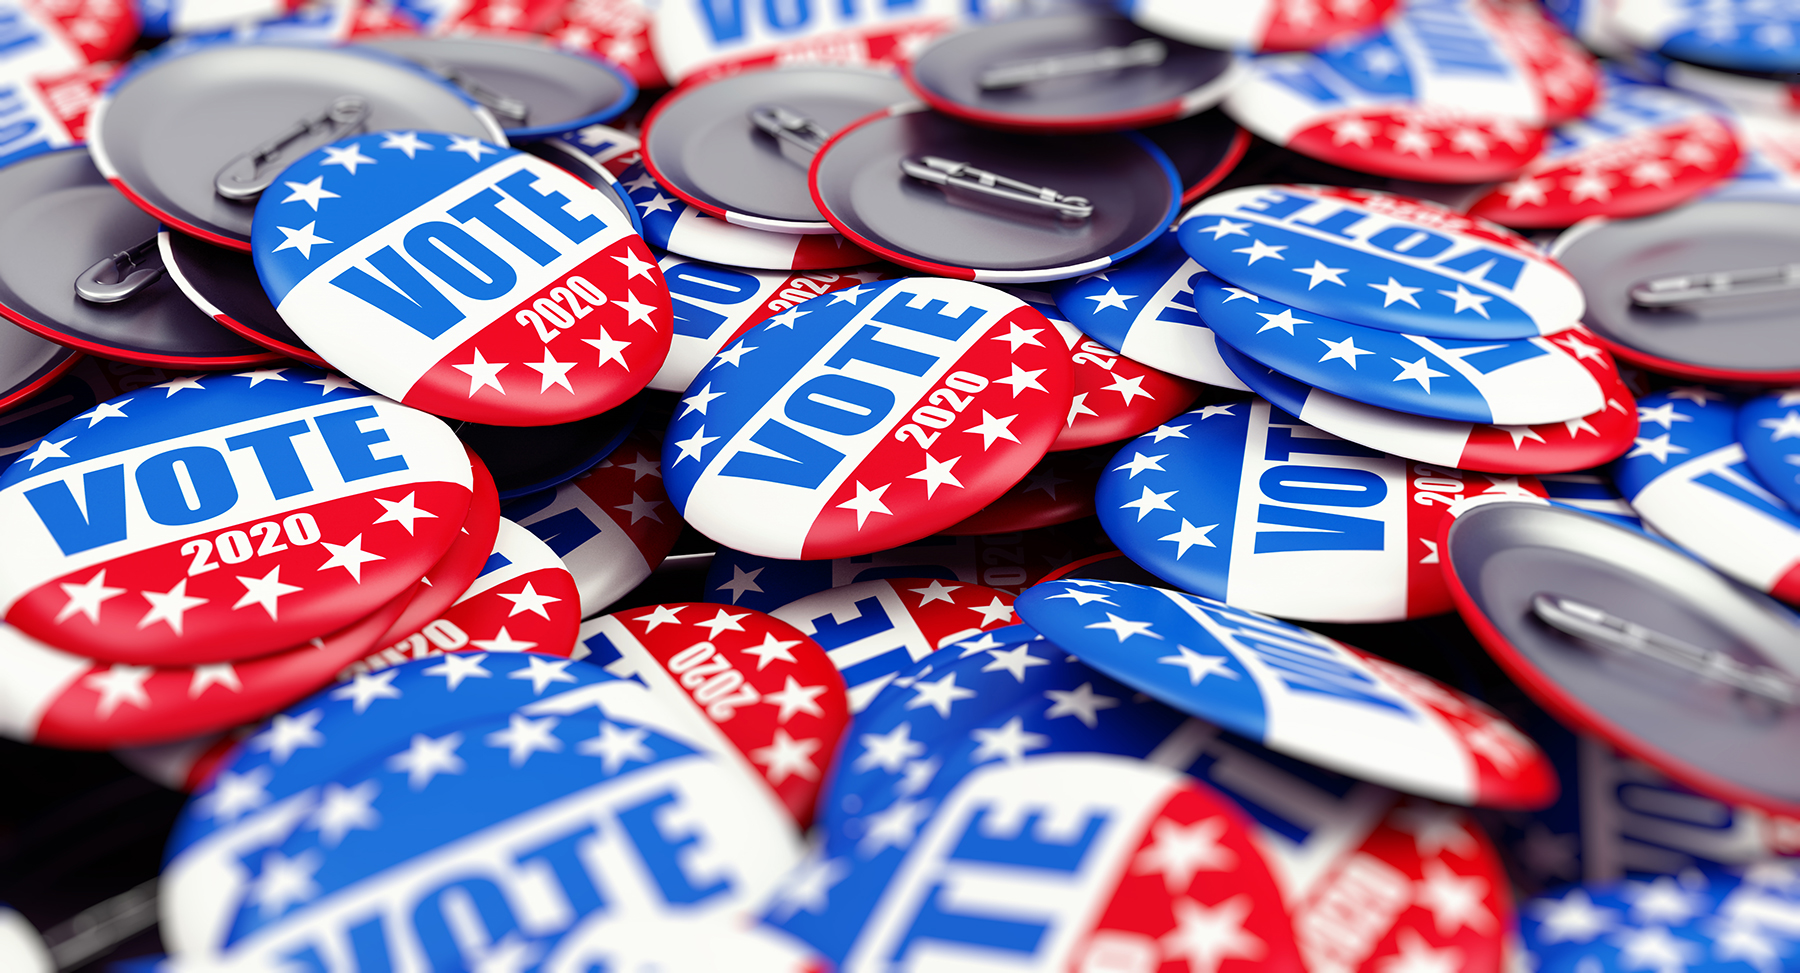 Voter pins stock image